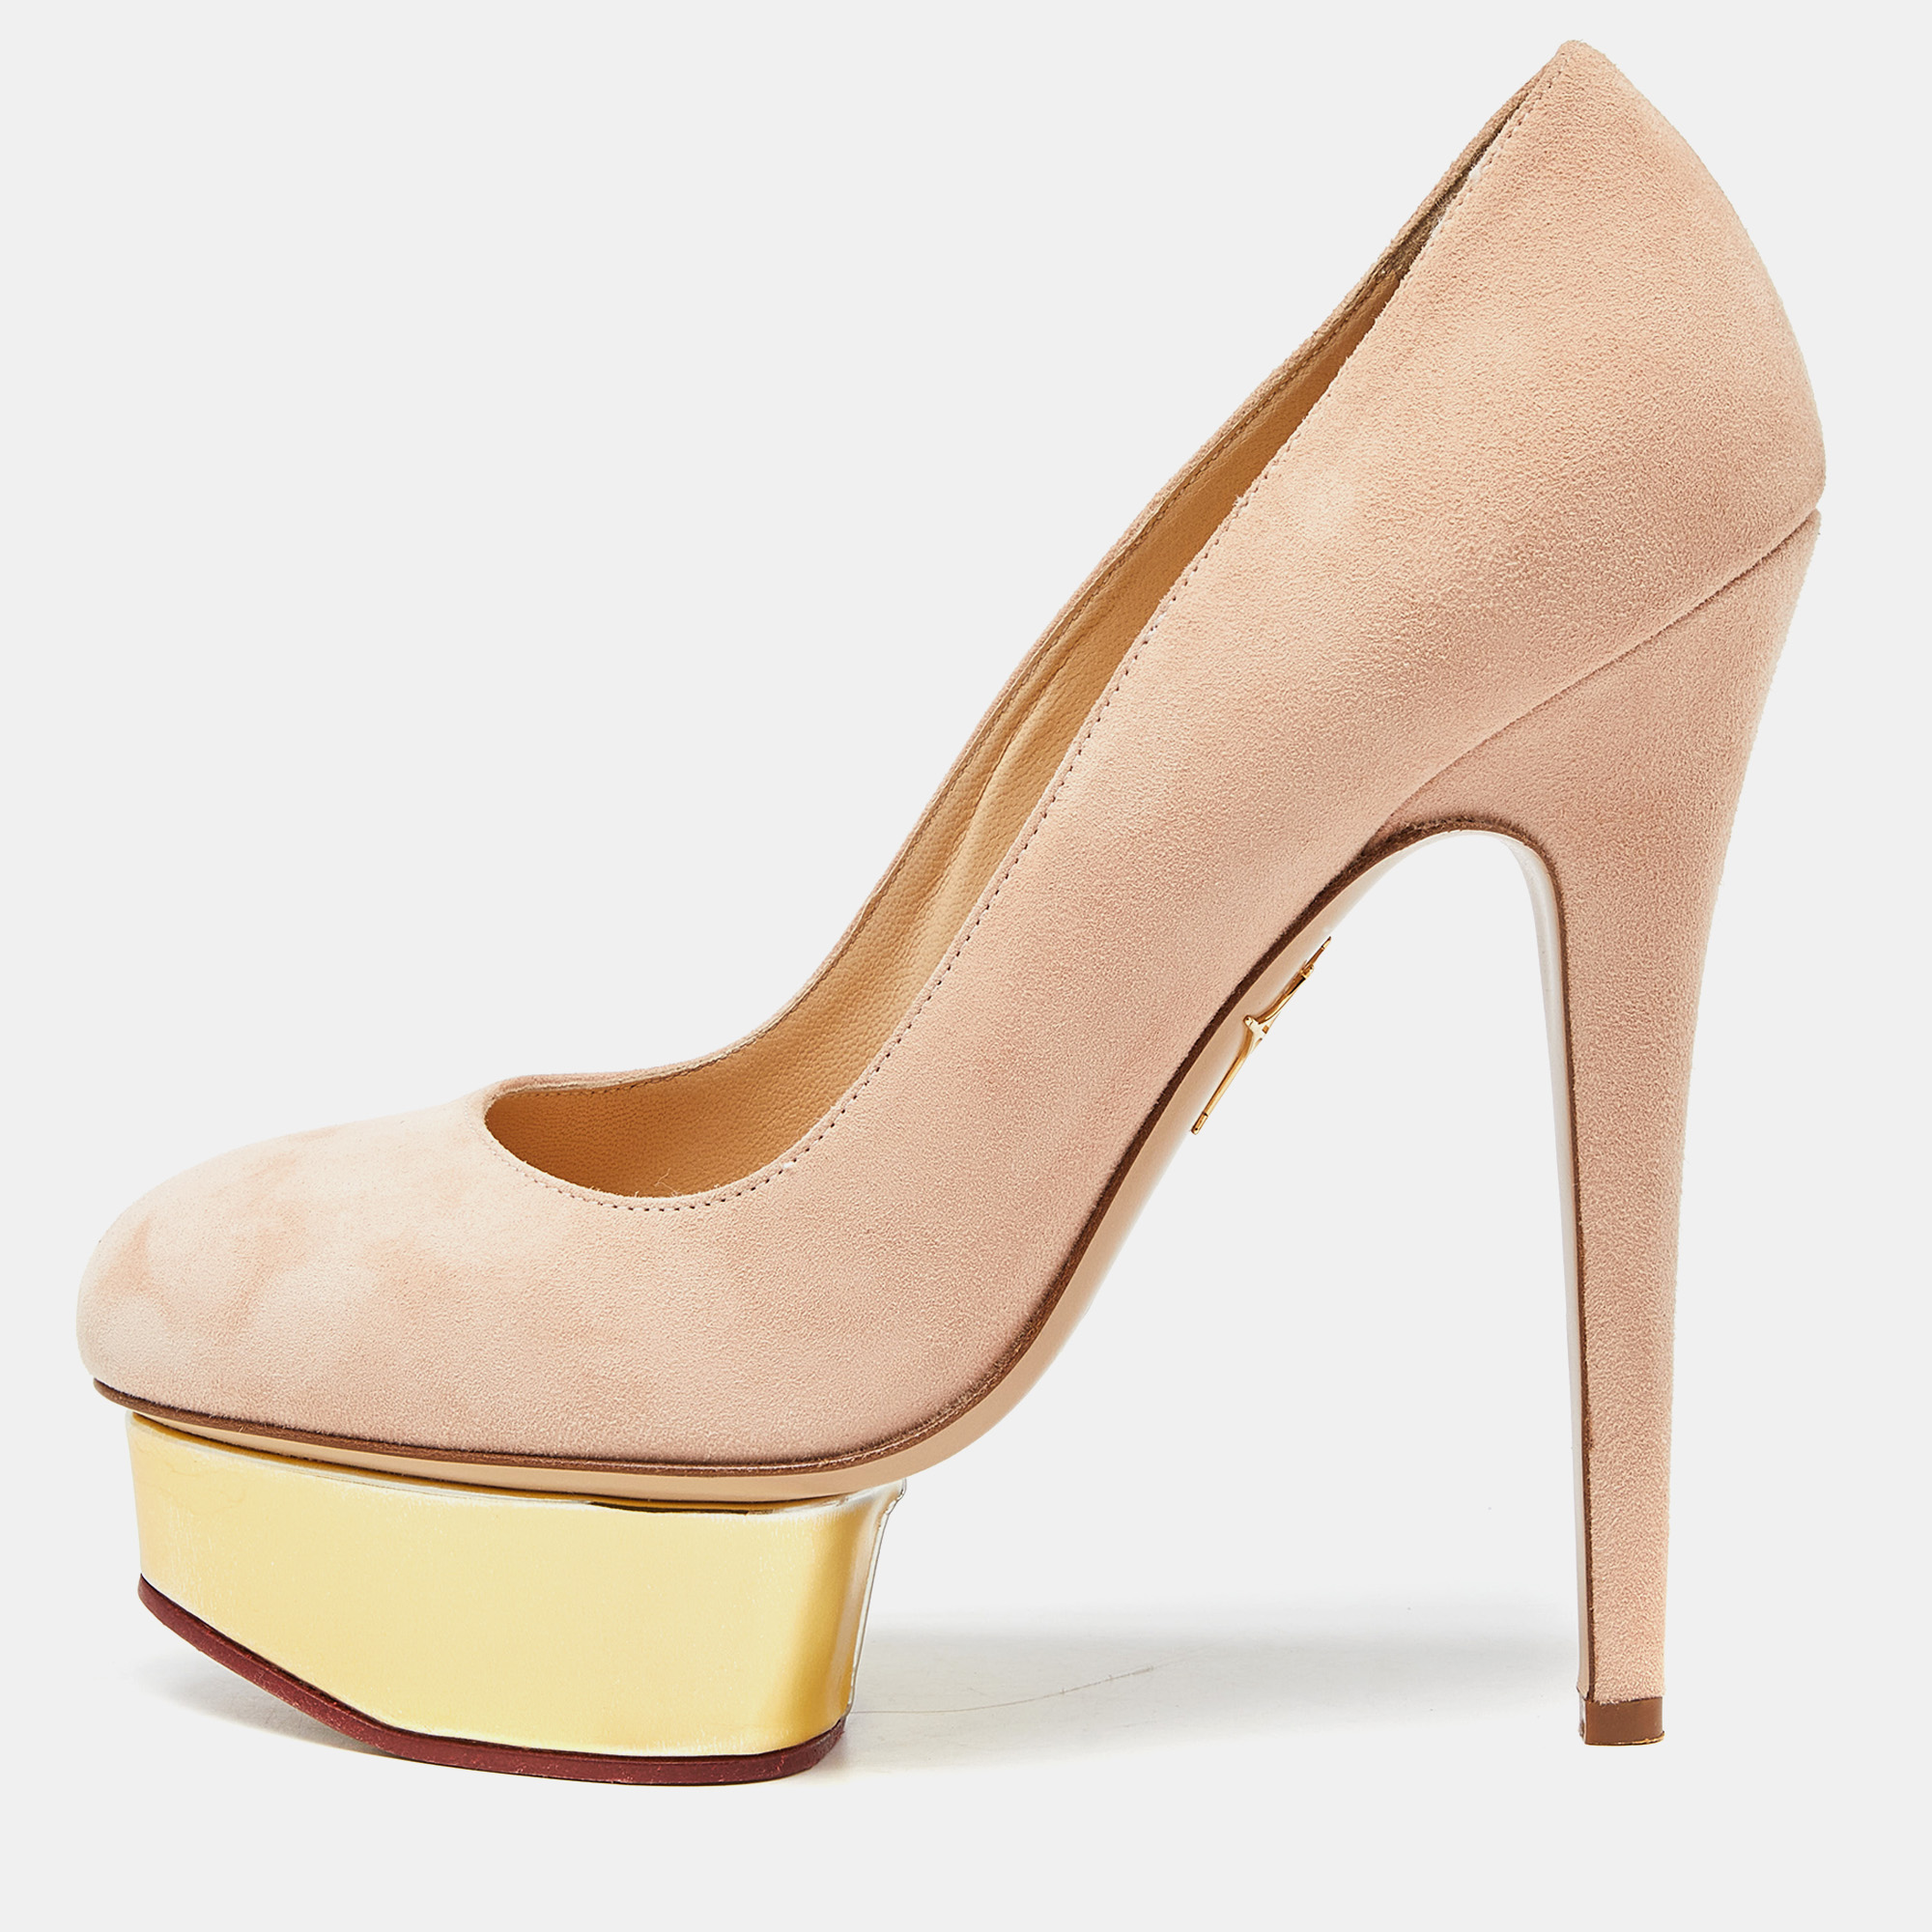 Charlotte olympia beige leather dolly platform pumps size 37